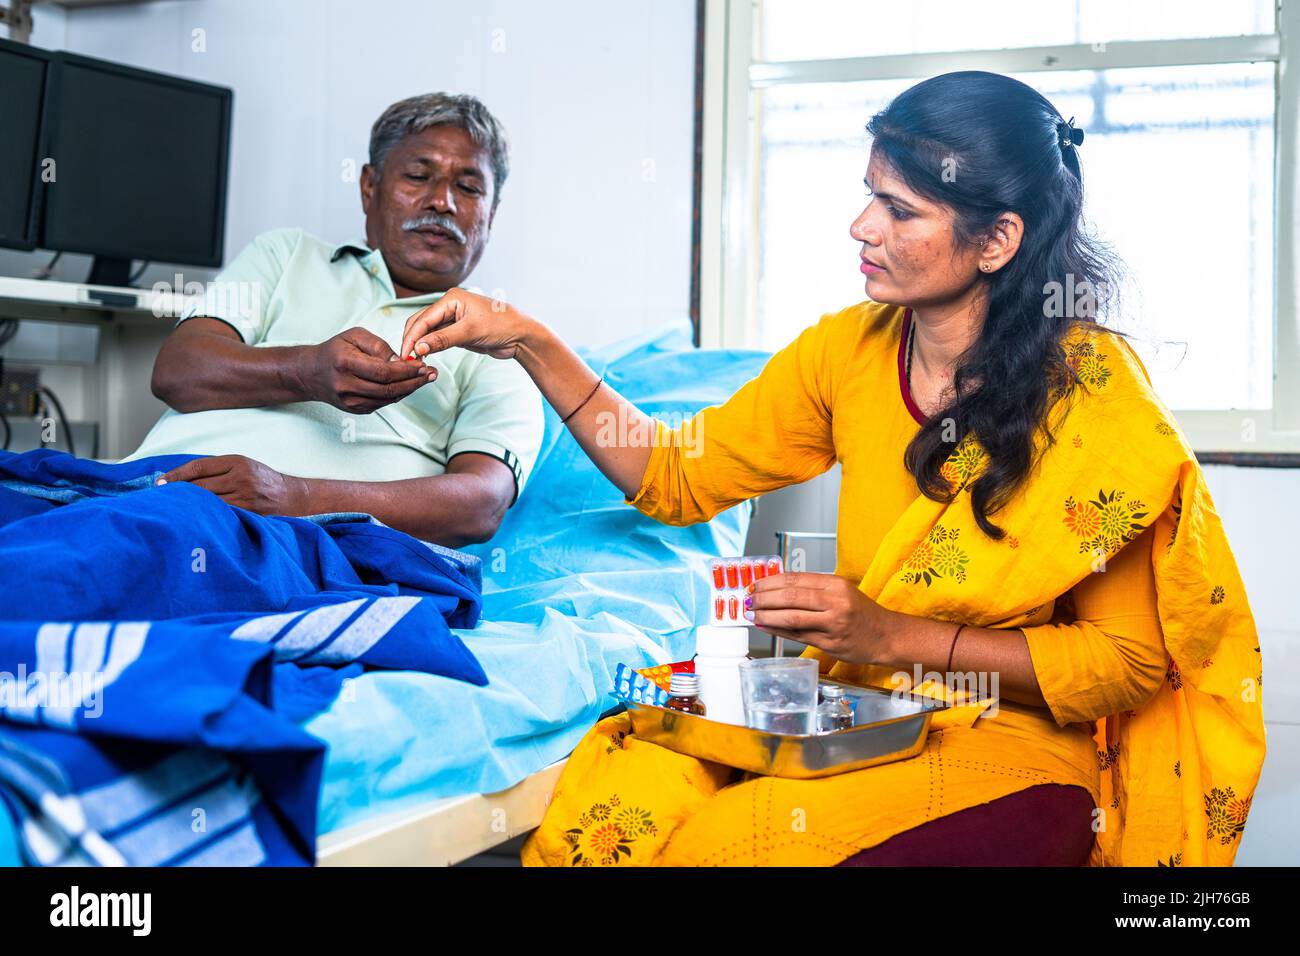 Daughter giving medicine or pills to admitted sick father at hospital - concept of family caring, medical treatment and health care. Stock Photo